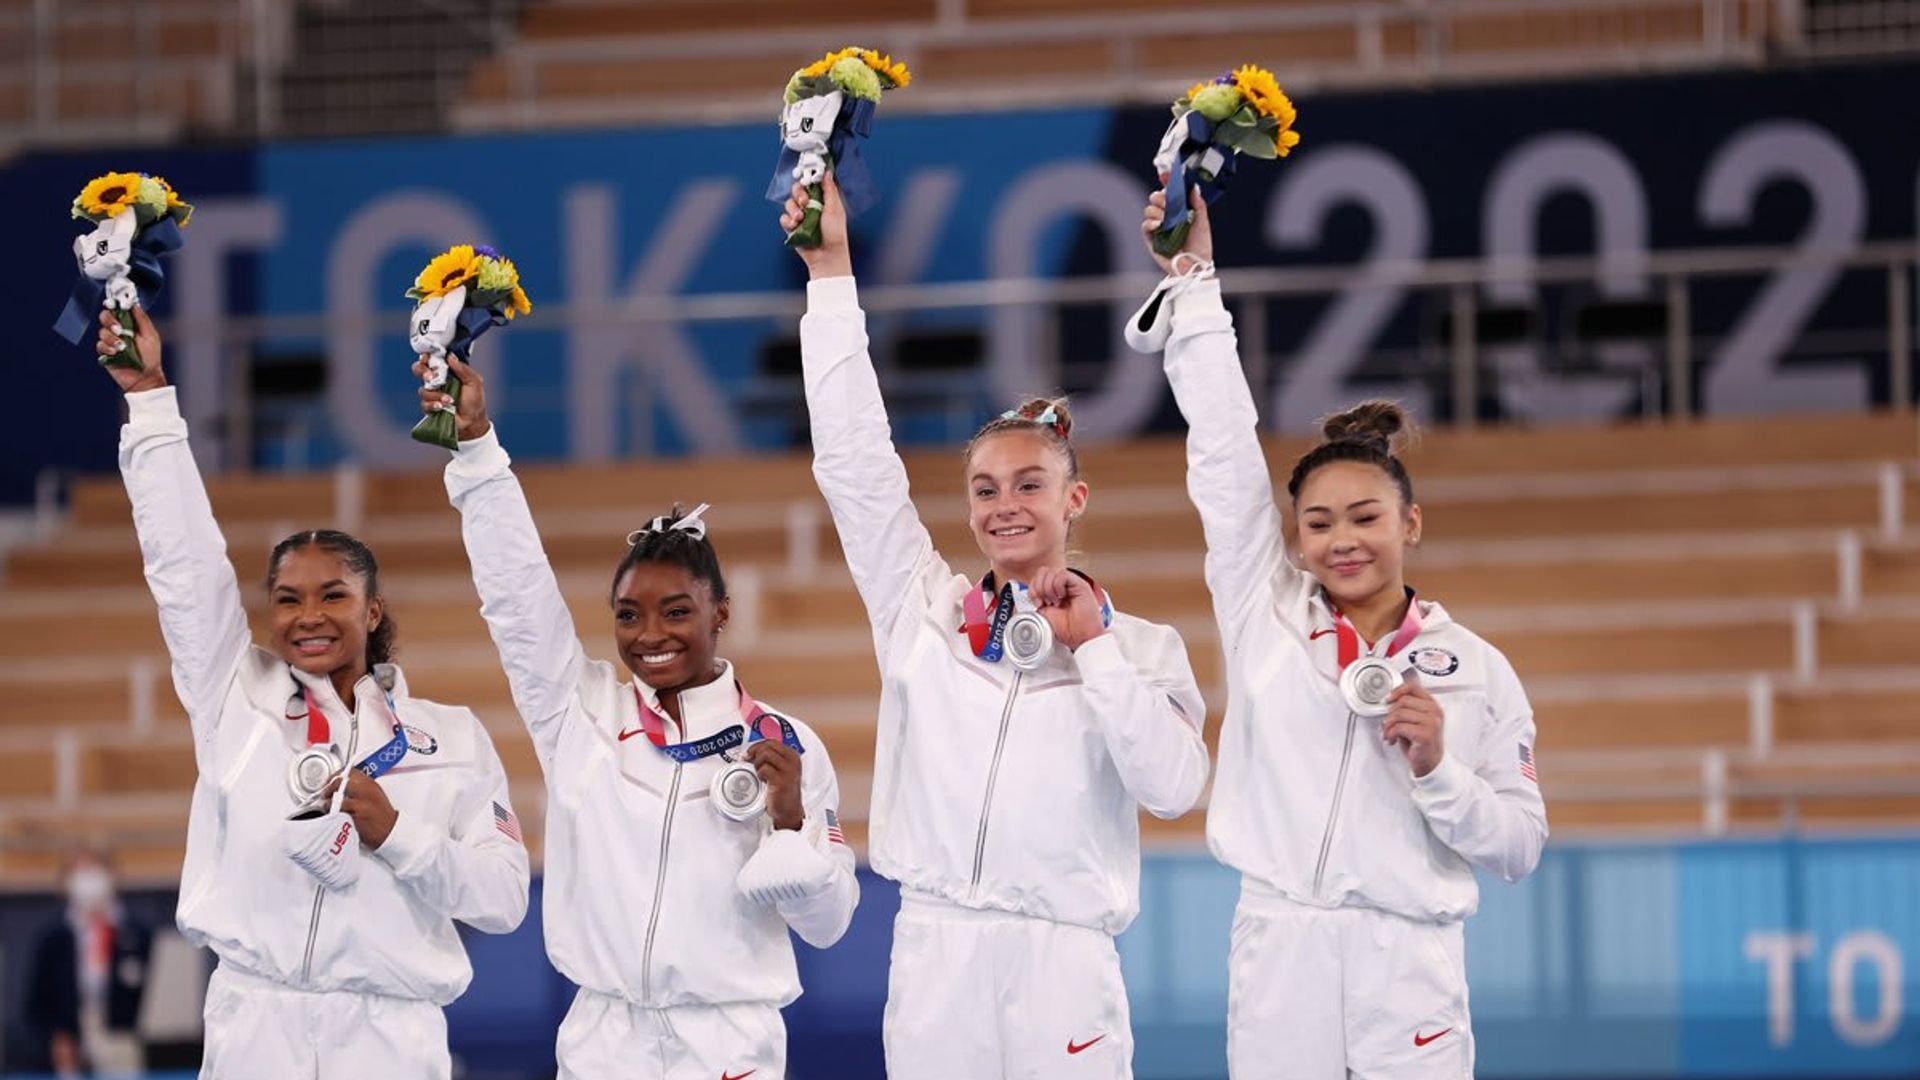 Team USA gymnasts secure silver medal despite Simone Biles withdrawal from Tokyo Olympics